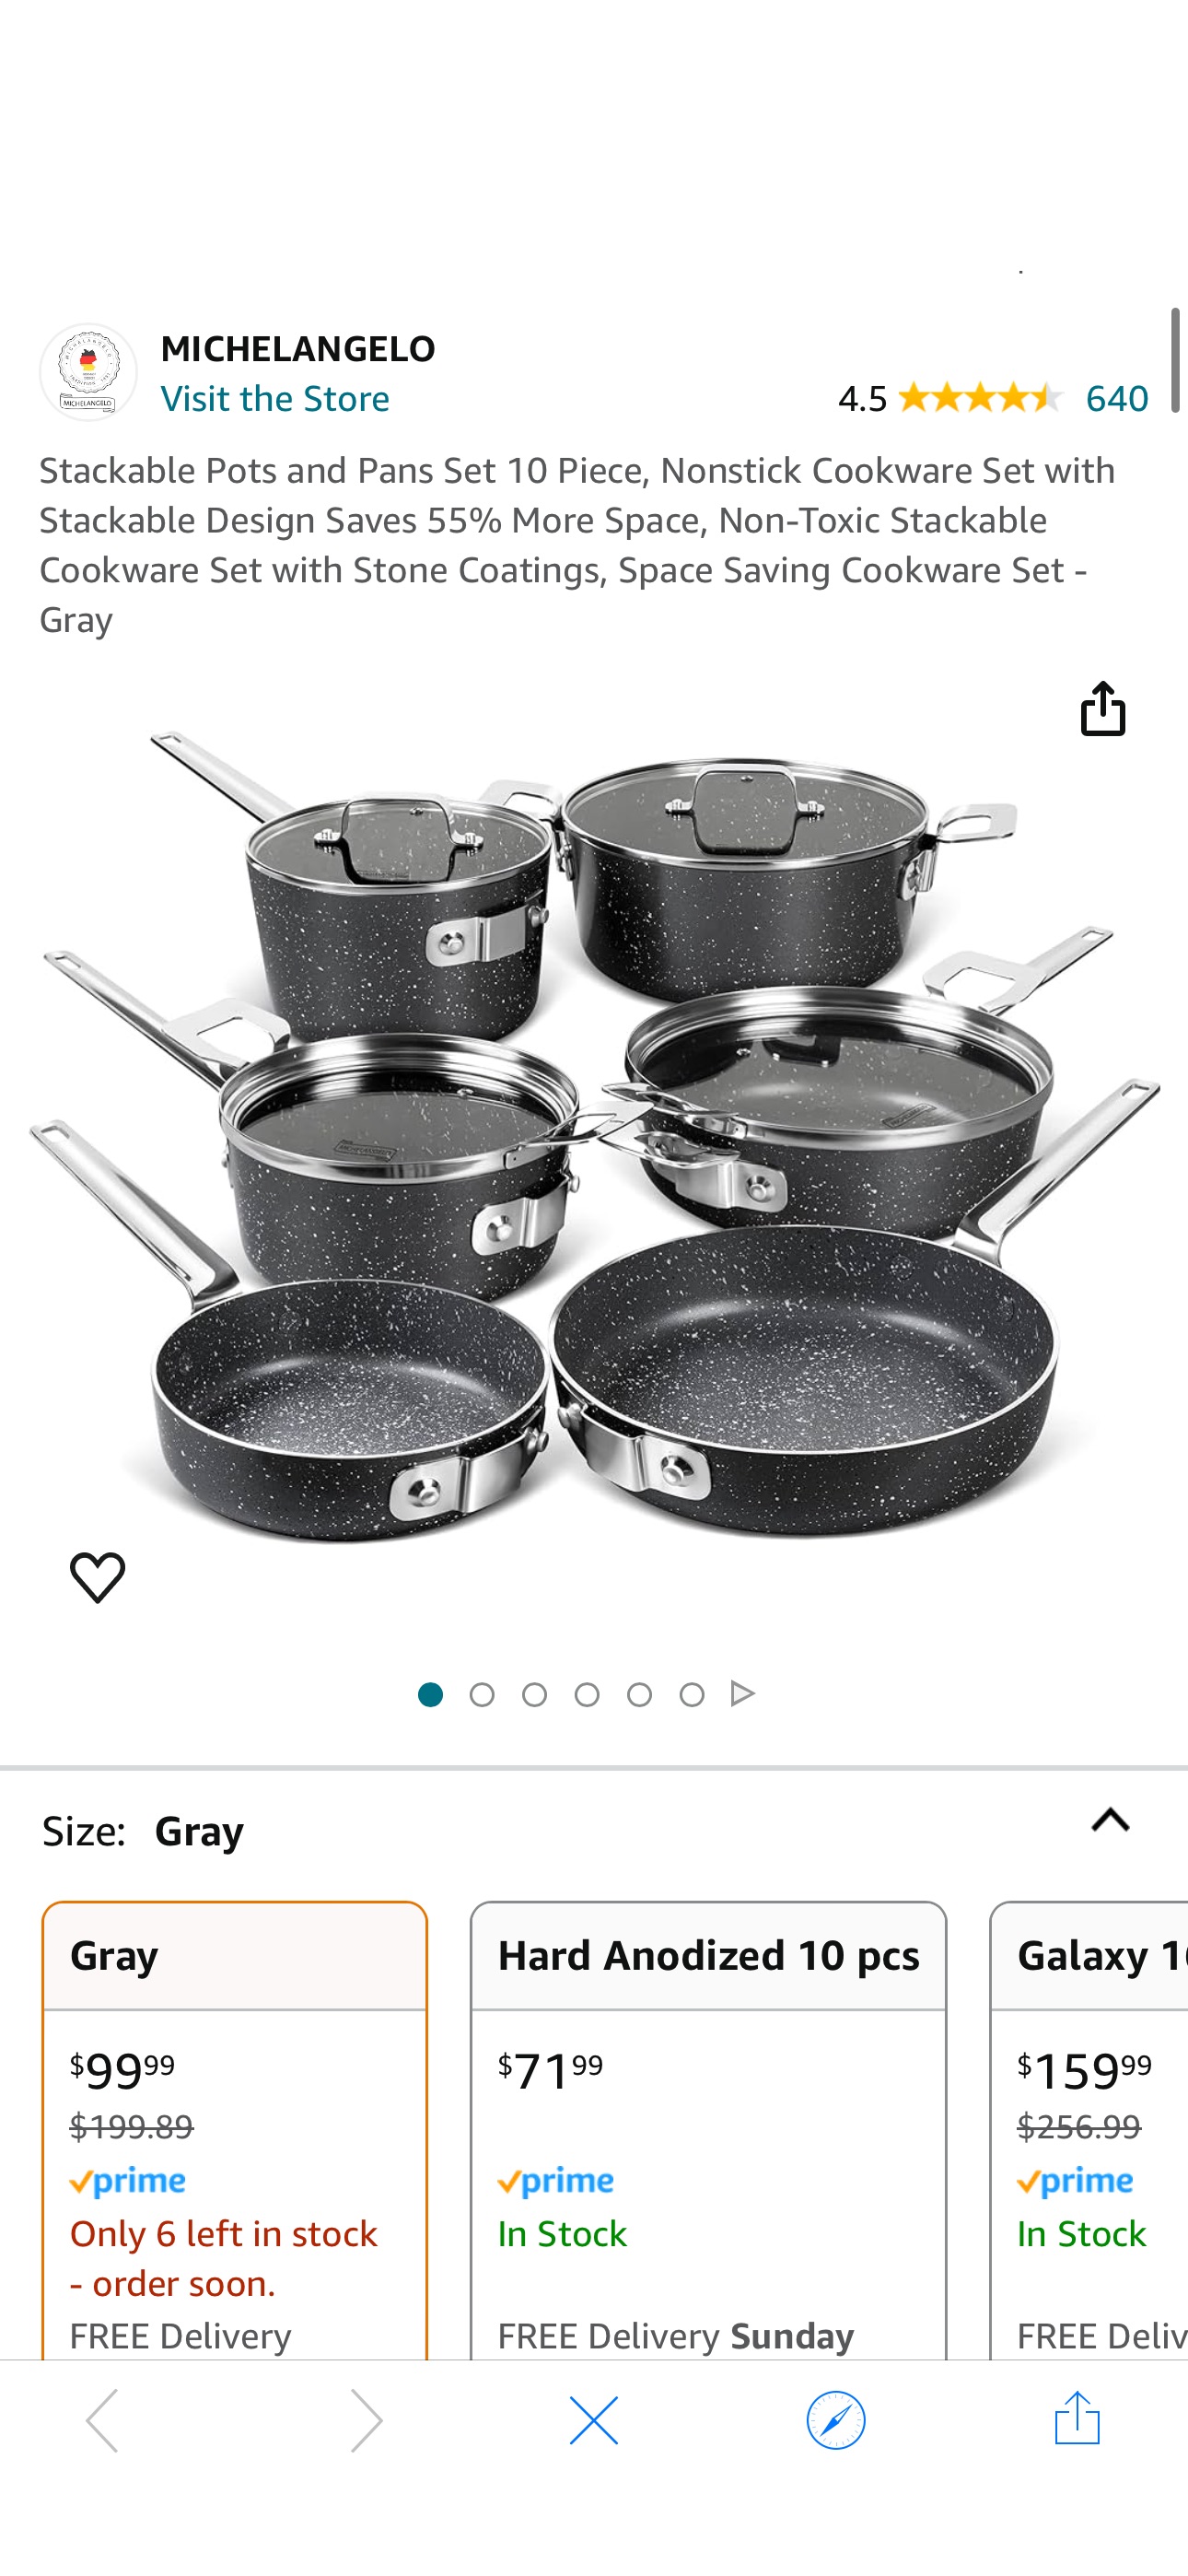 Amazon.com: Stackable Pots and Pans Set 10 Piece, Nonstick Cookware Set with Stackable Design Saves 55% More Space, Non-Toxic Stackable Cookware Set with Stone Coatings, Space Saving Cookware Set -Gra